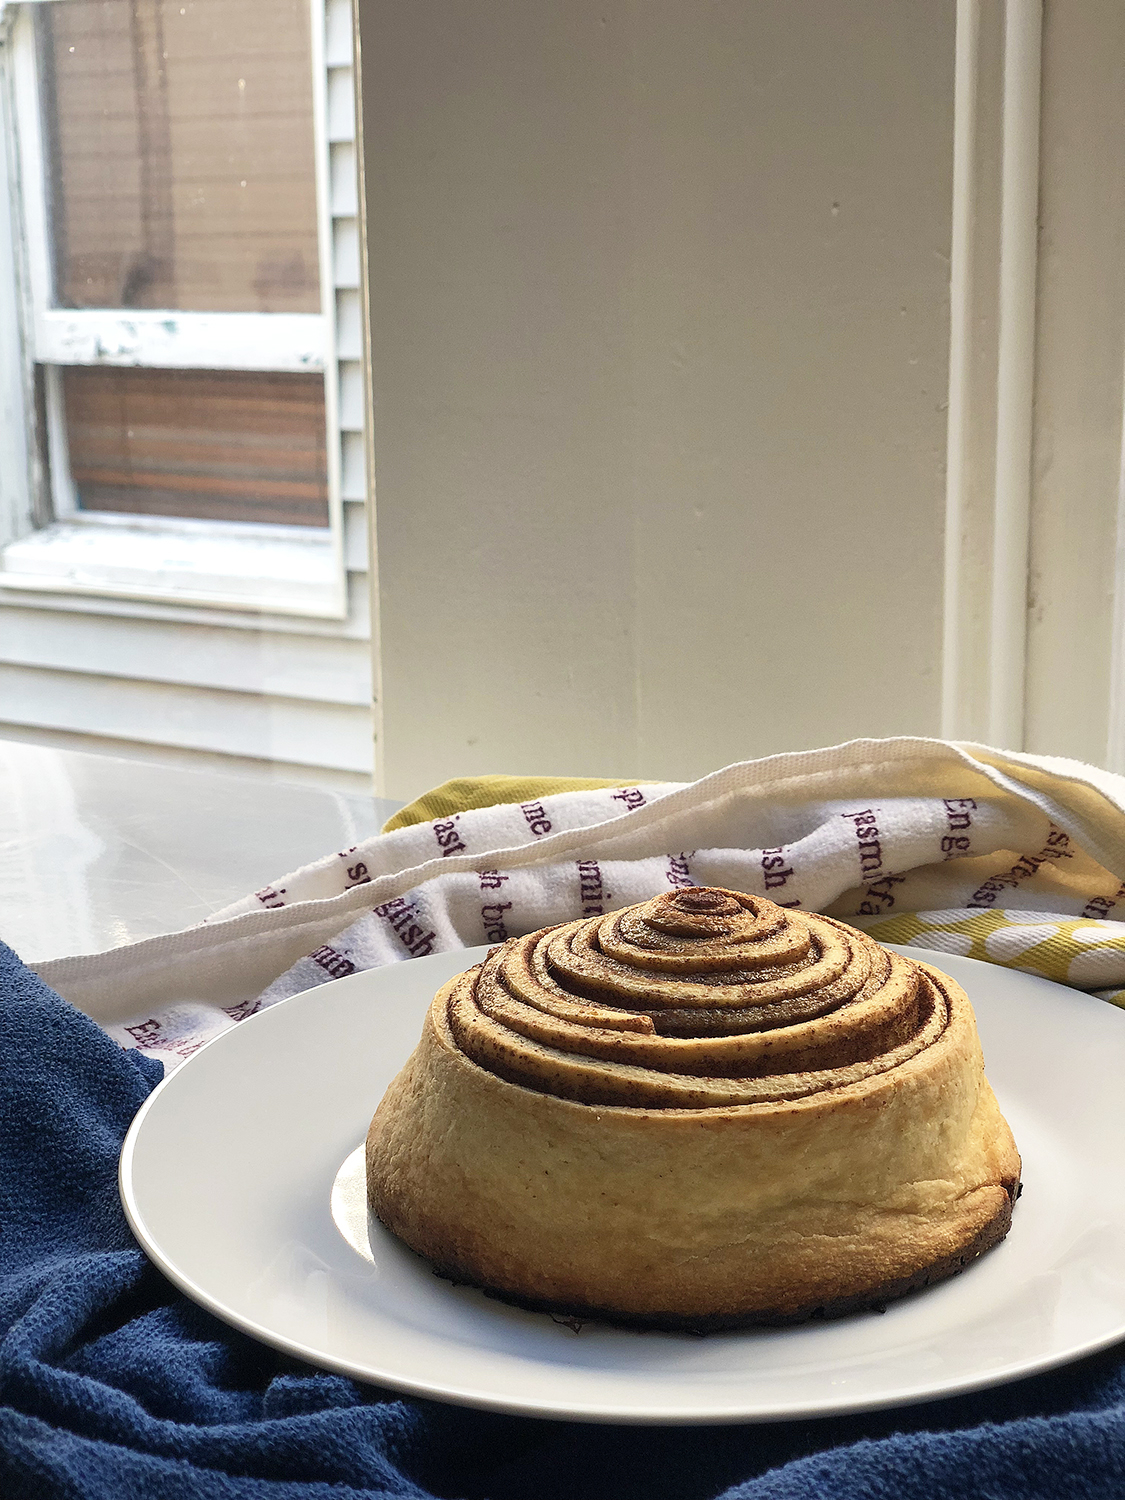 Recipe: Giant Cinnamon Roll with Brown Butter and Almond Flour